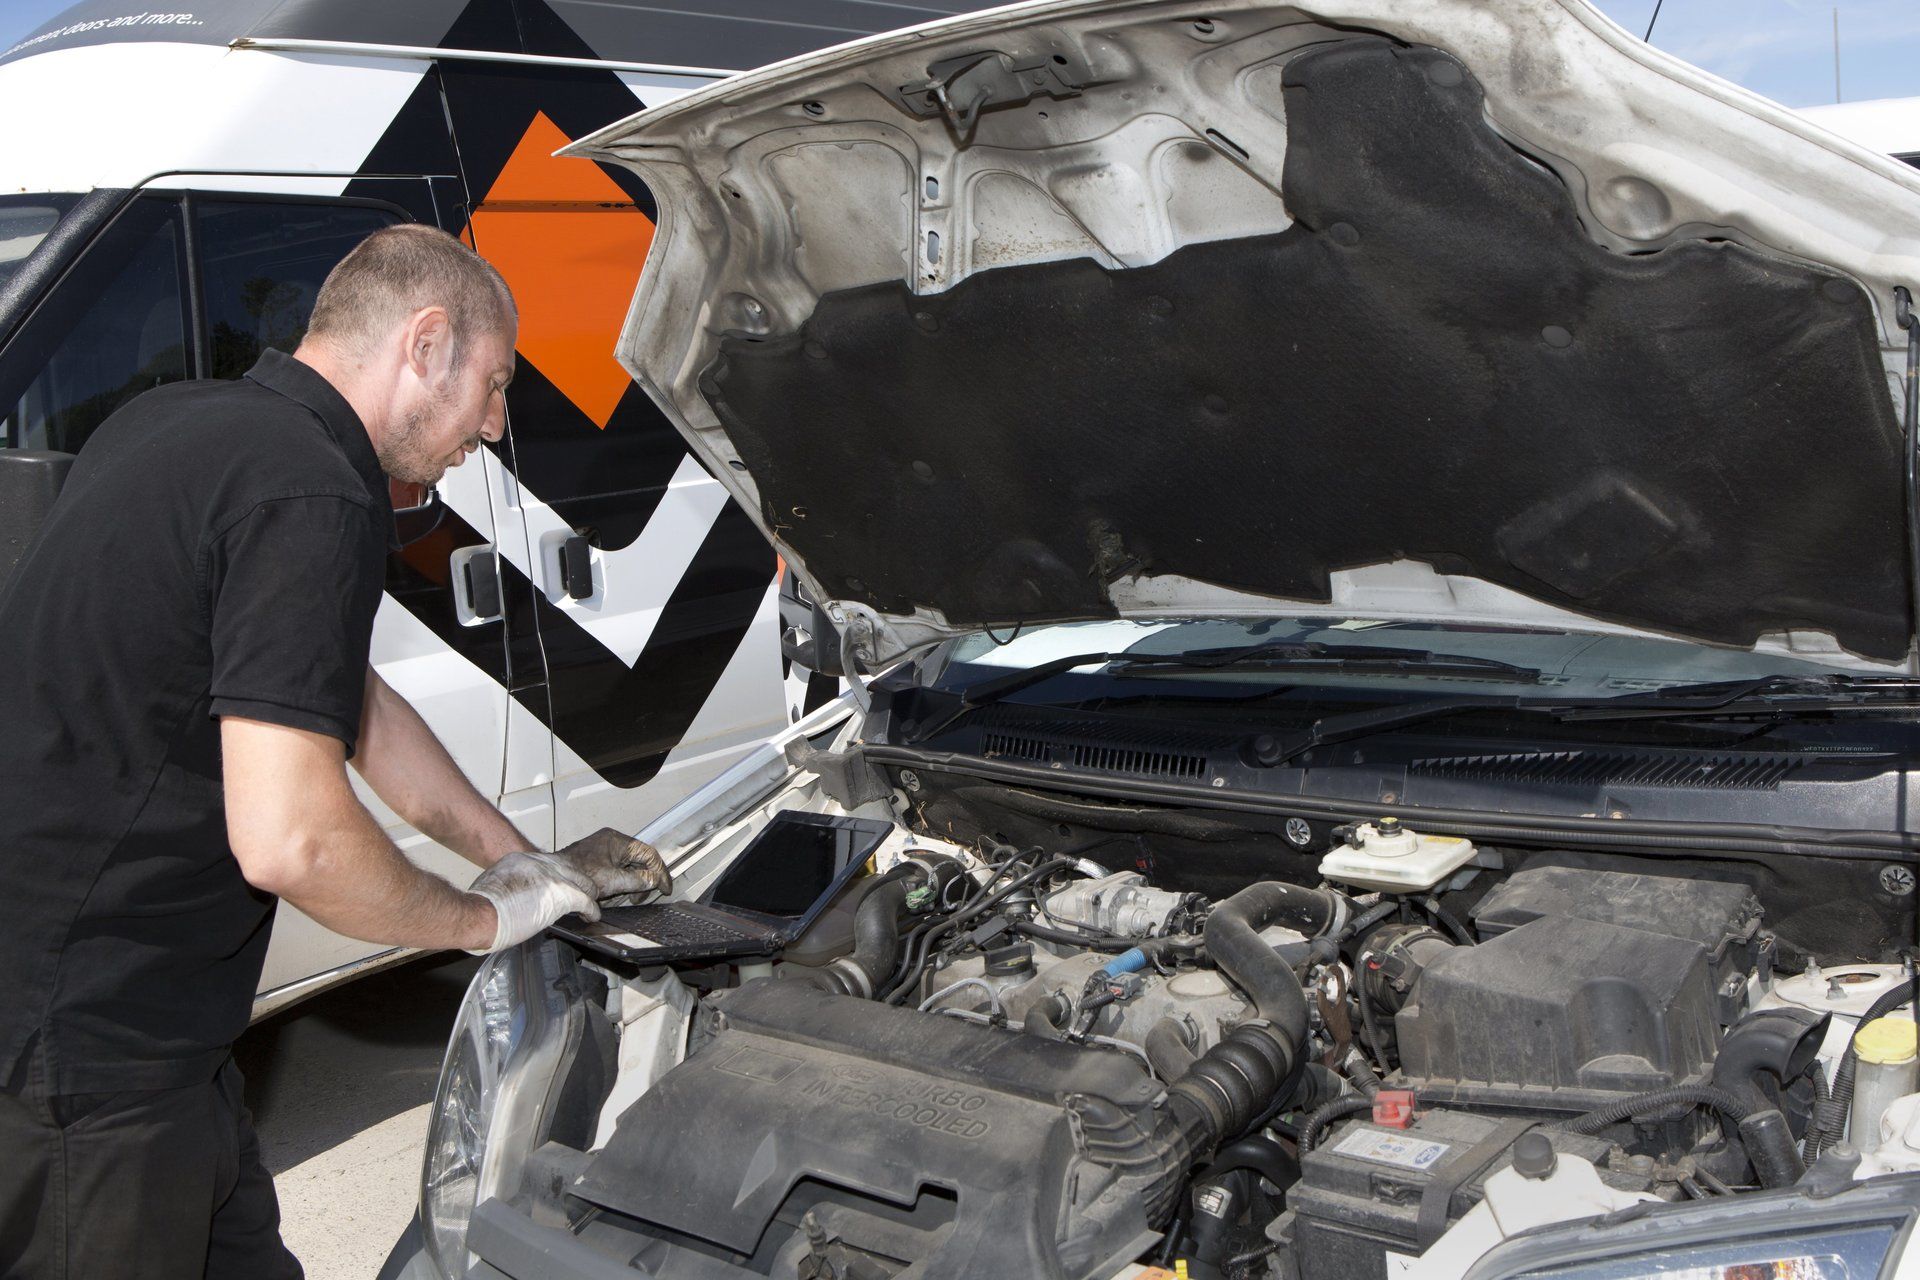 4 Signs Of A Great Mobile Mechanic